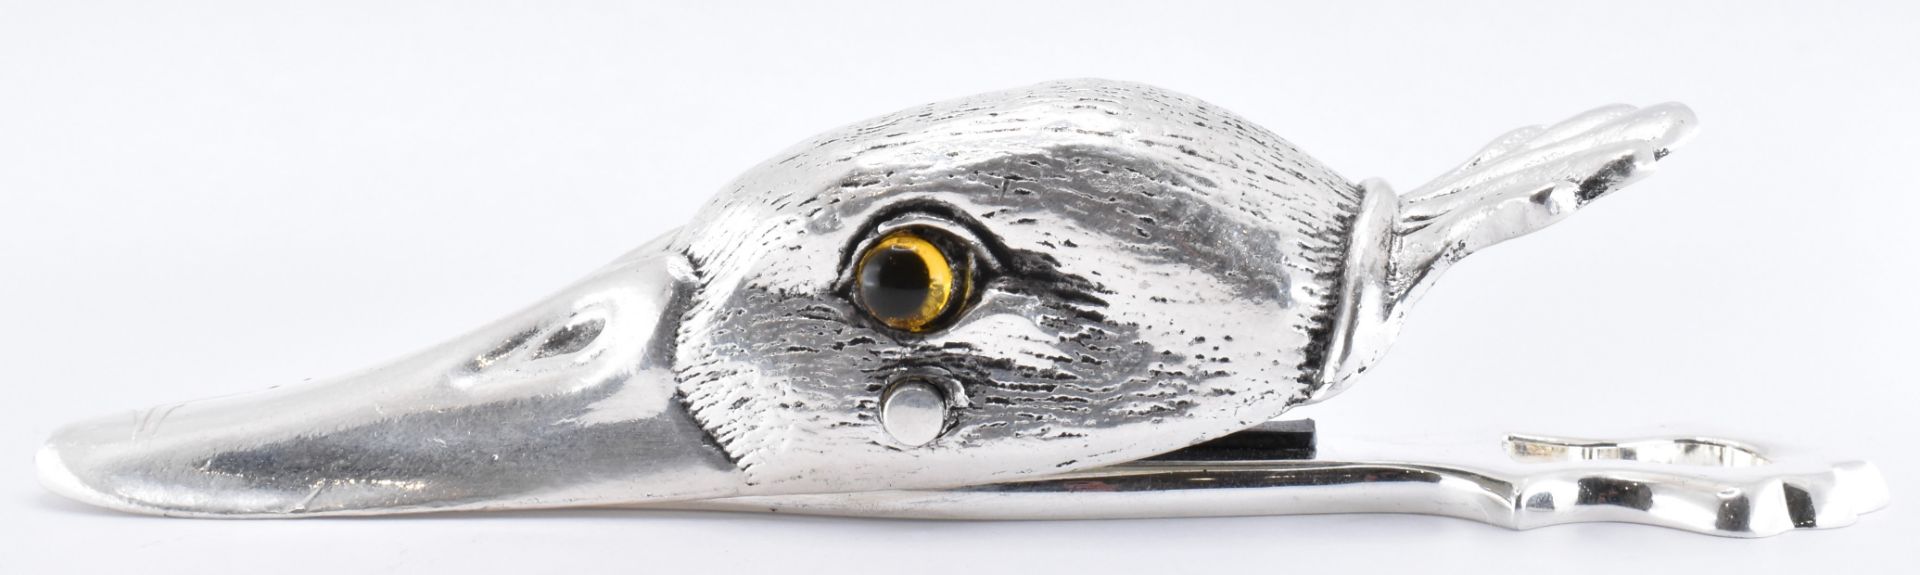 SILVER PLATED DUCKS HEAD PAPER CLIP - Image 3 of 5